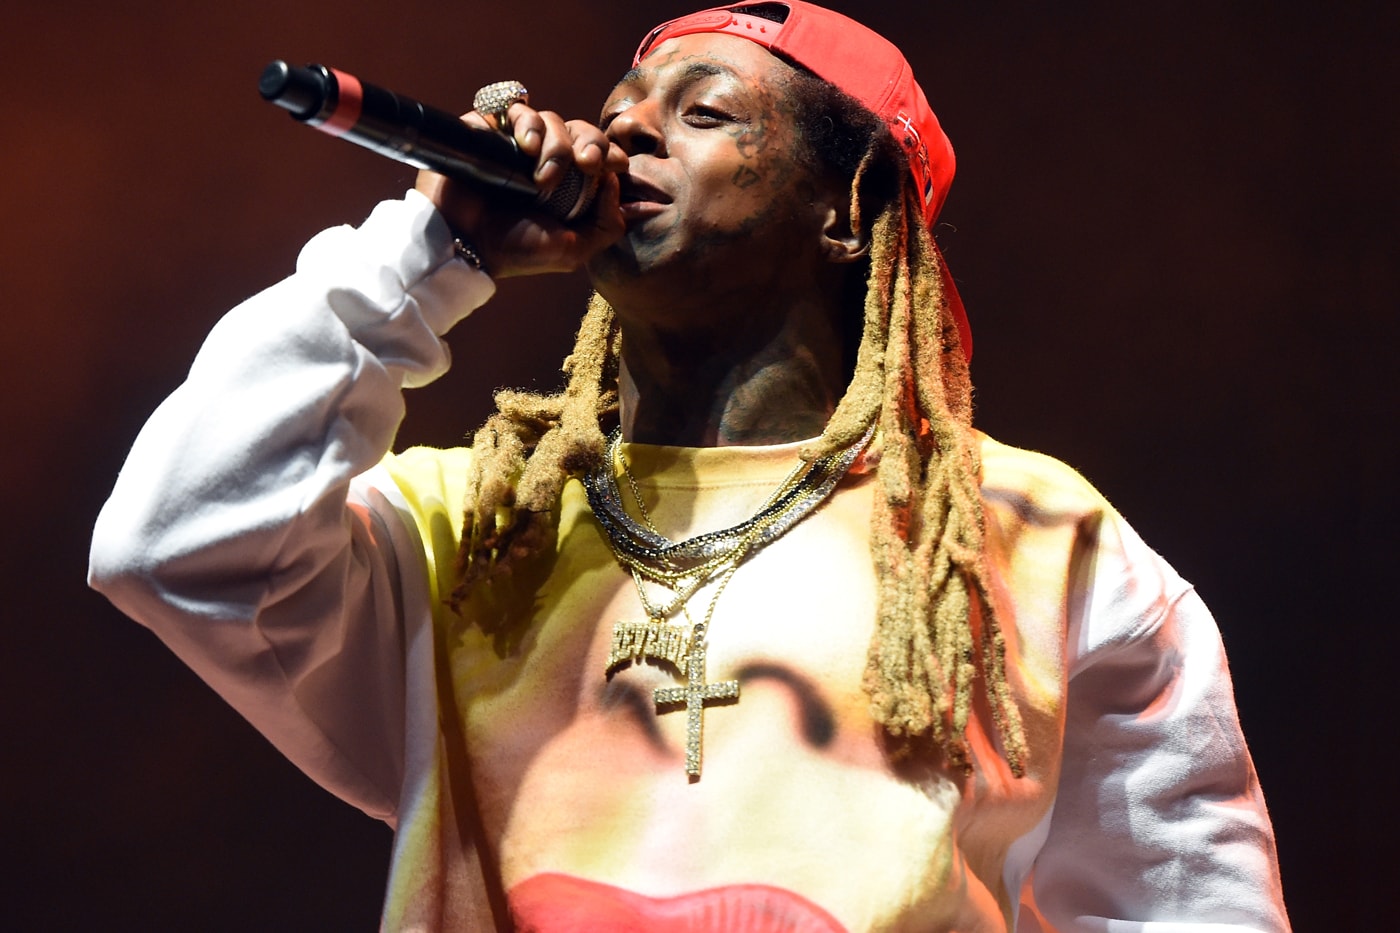 lil-wayne-back-at-it-again-with-the-cash-money-disses